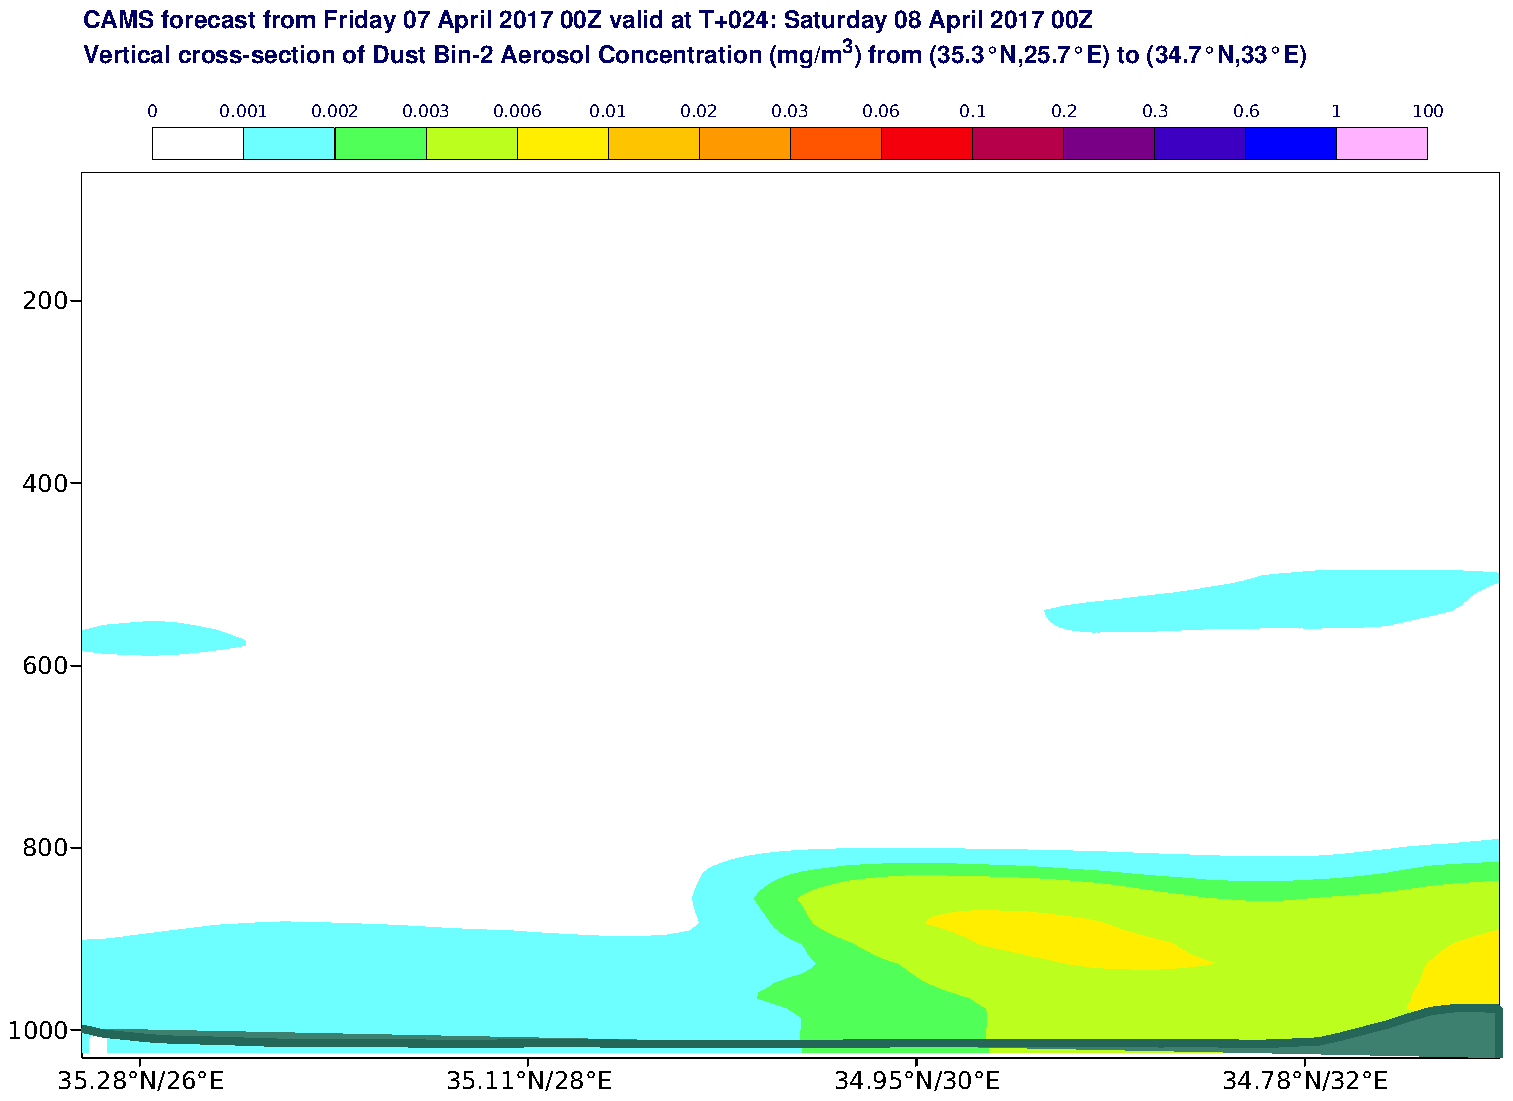 Vertical cross-section of Dust Bin-2 Aerosol Concentration (mg/m3) valid at T24 - 2017-04-08 00:00